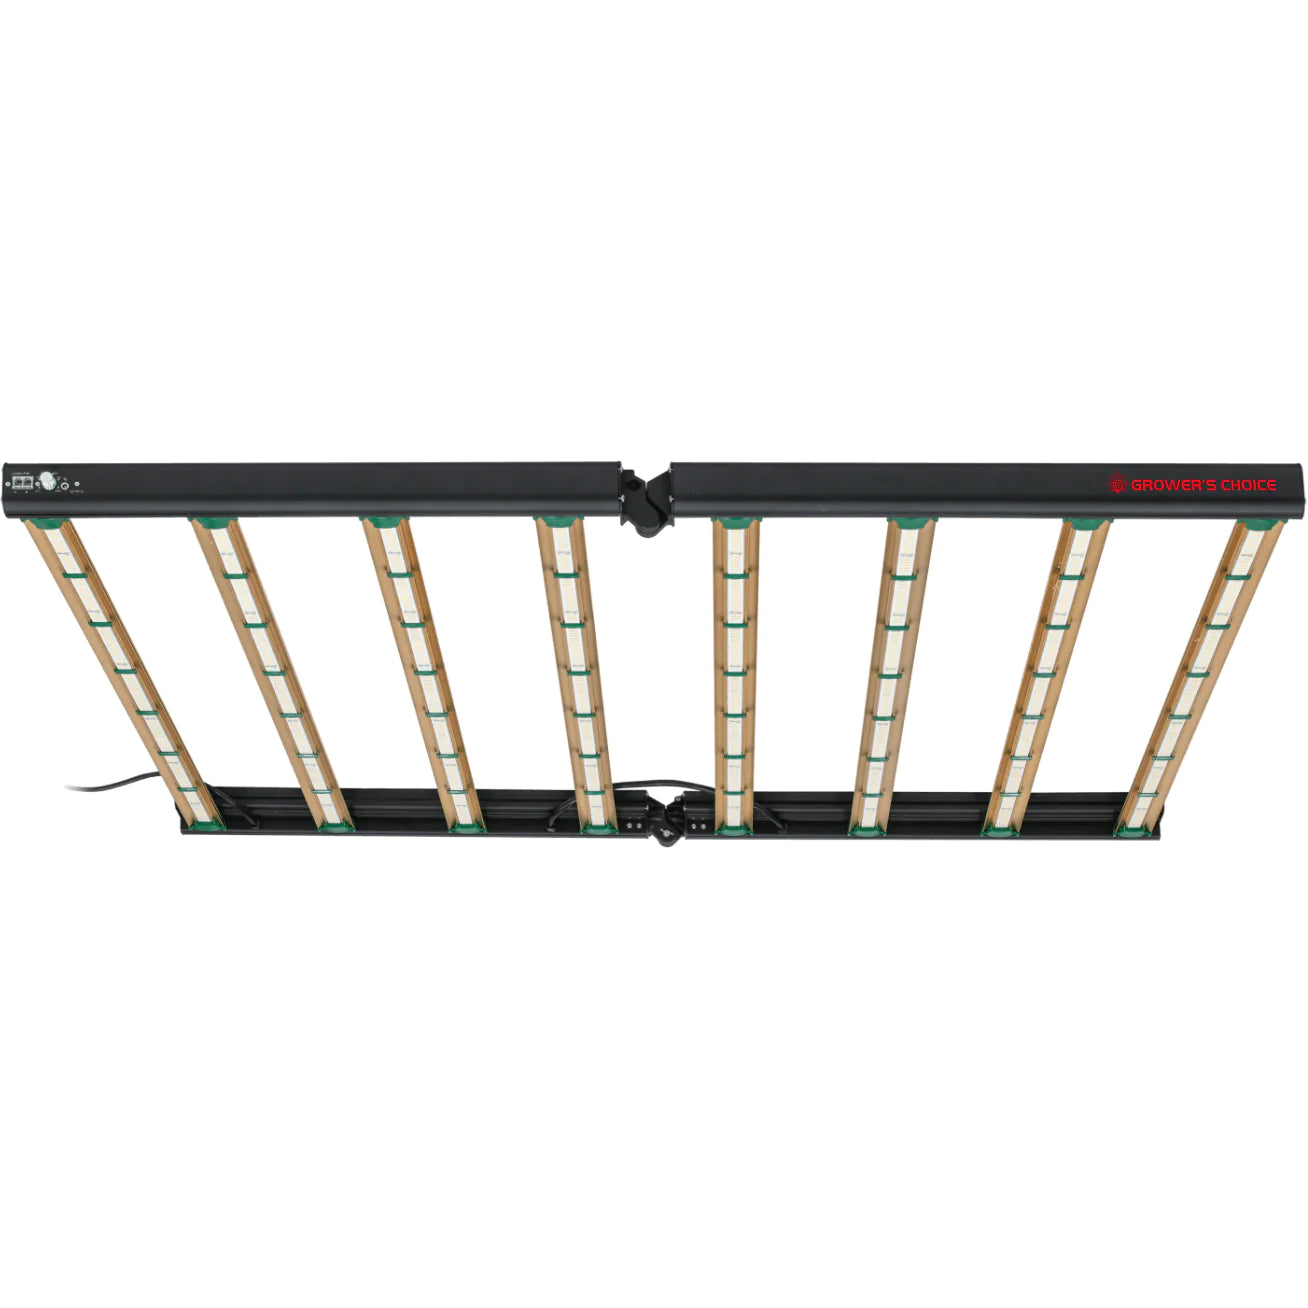 Product Image:Grower's Choice ROI-E900 LED Commercial Lighting Fixture